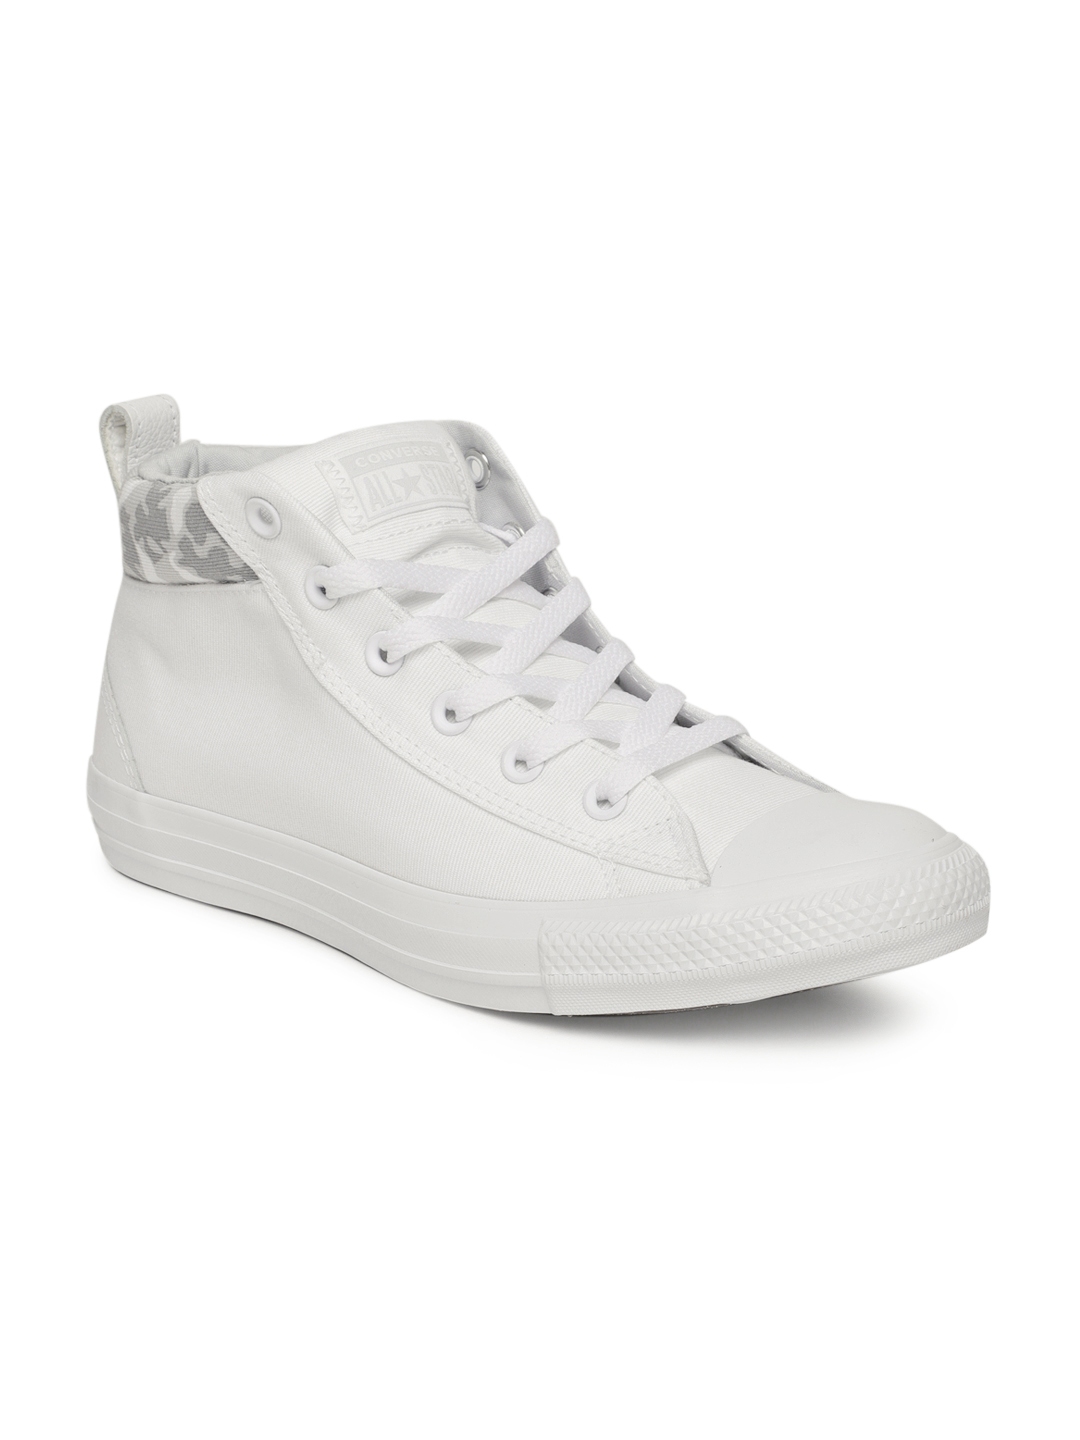 39 Limited Edition Buy white canvas shoes for Mens